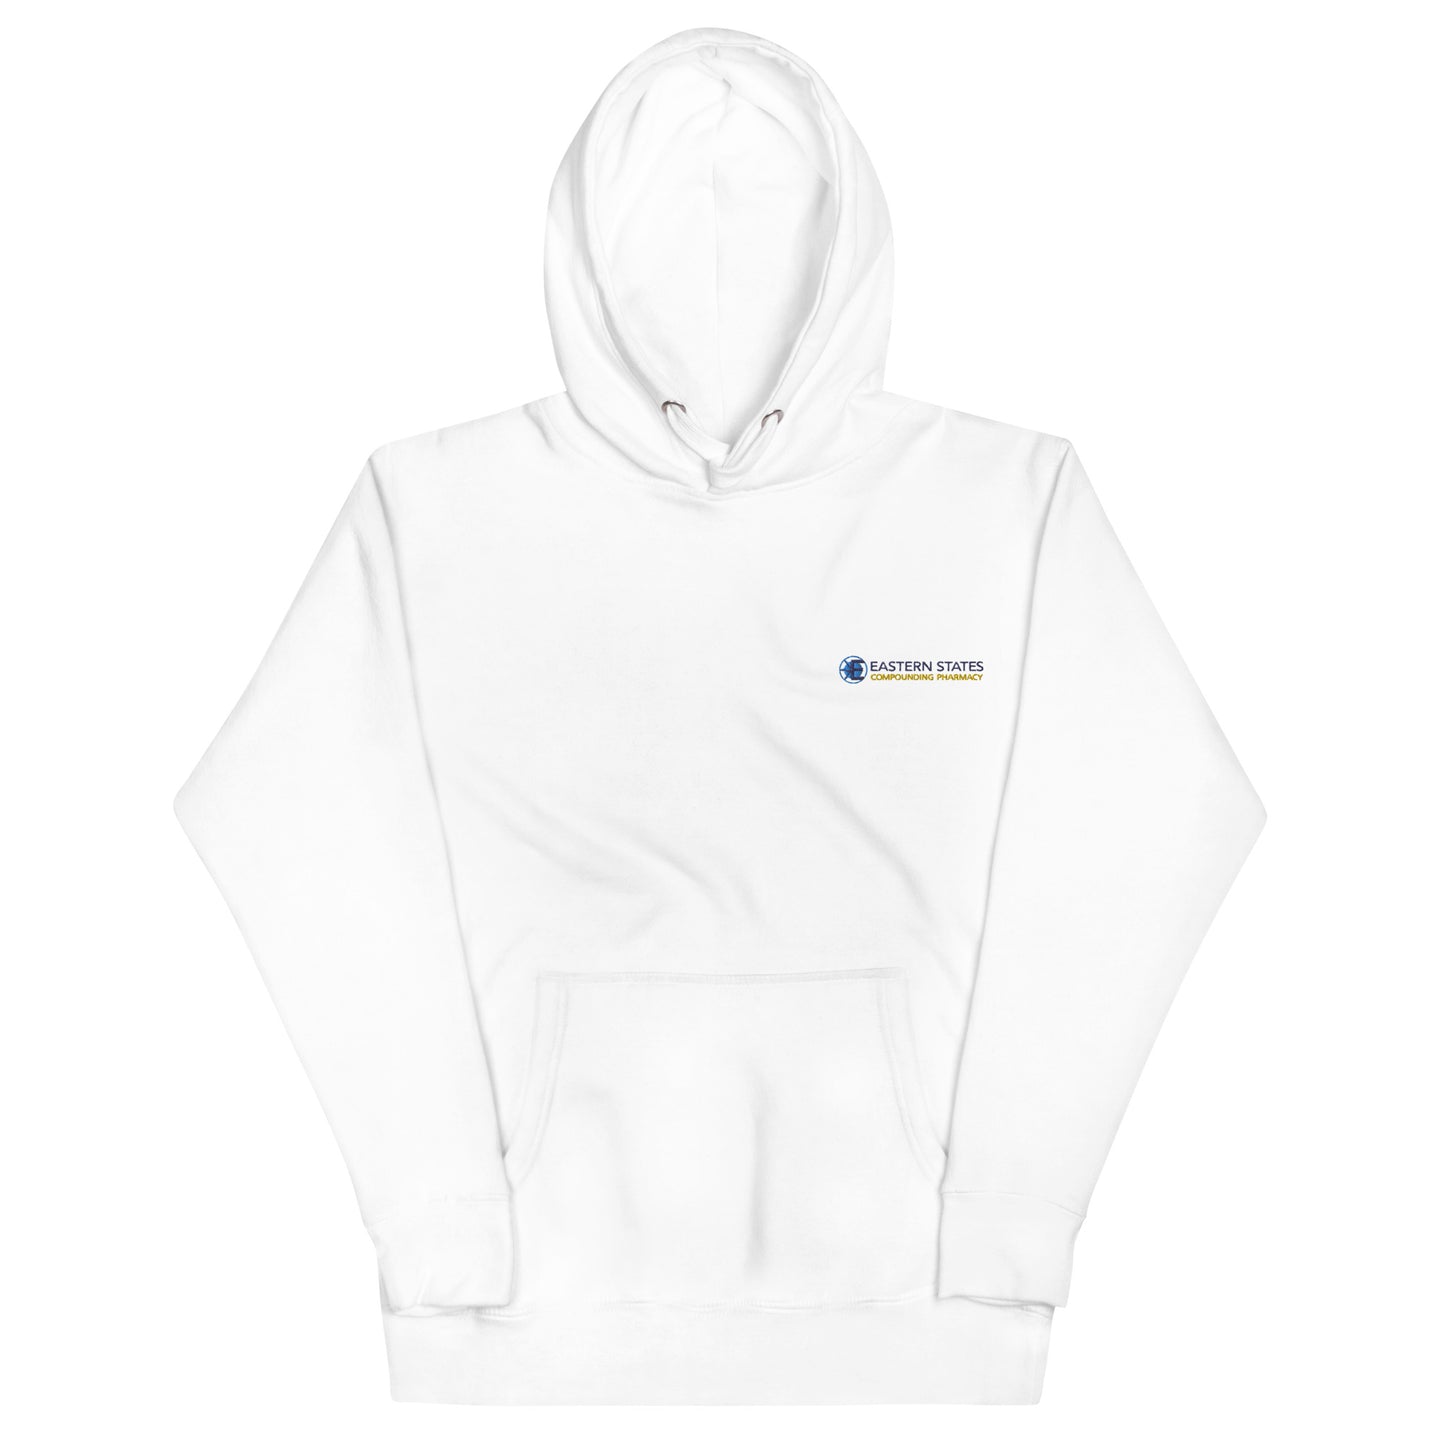 Unisex Premium Hoodie (fitted cut) - Eastern States